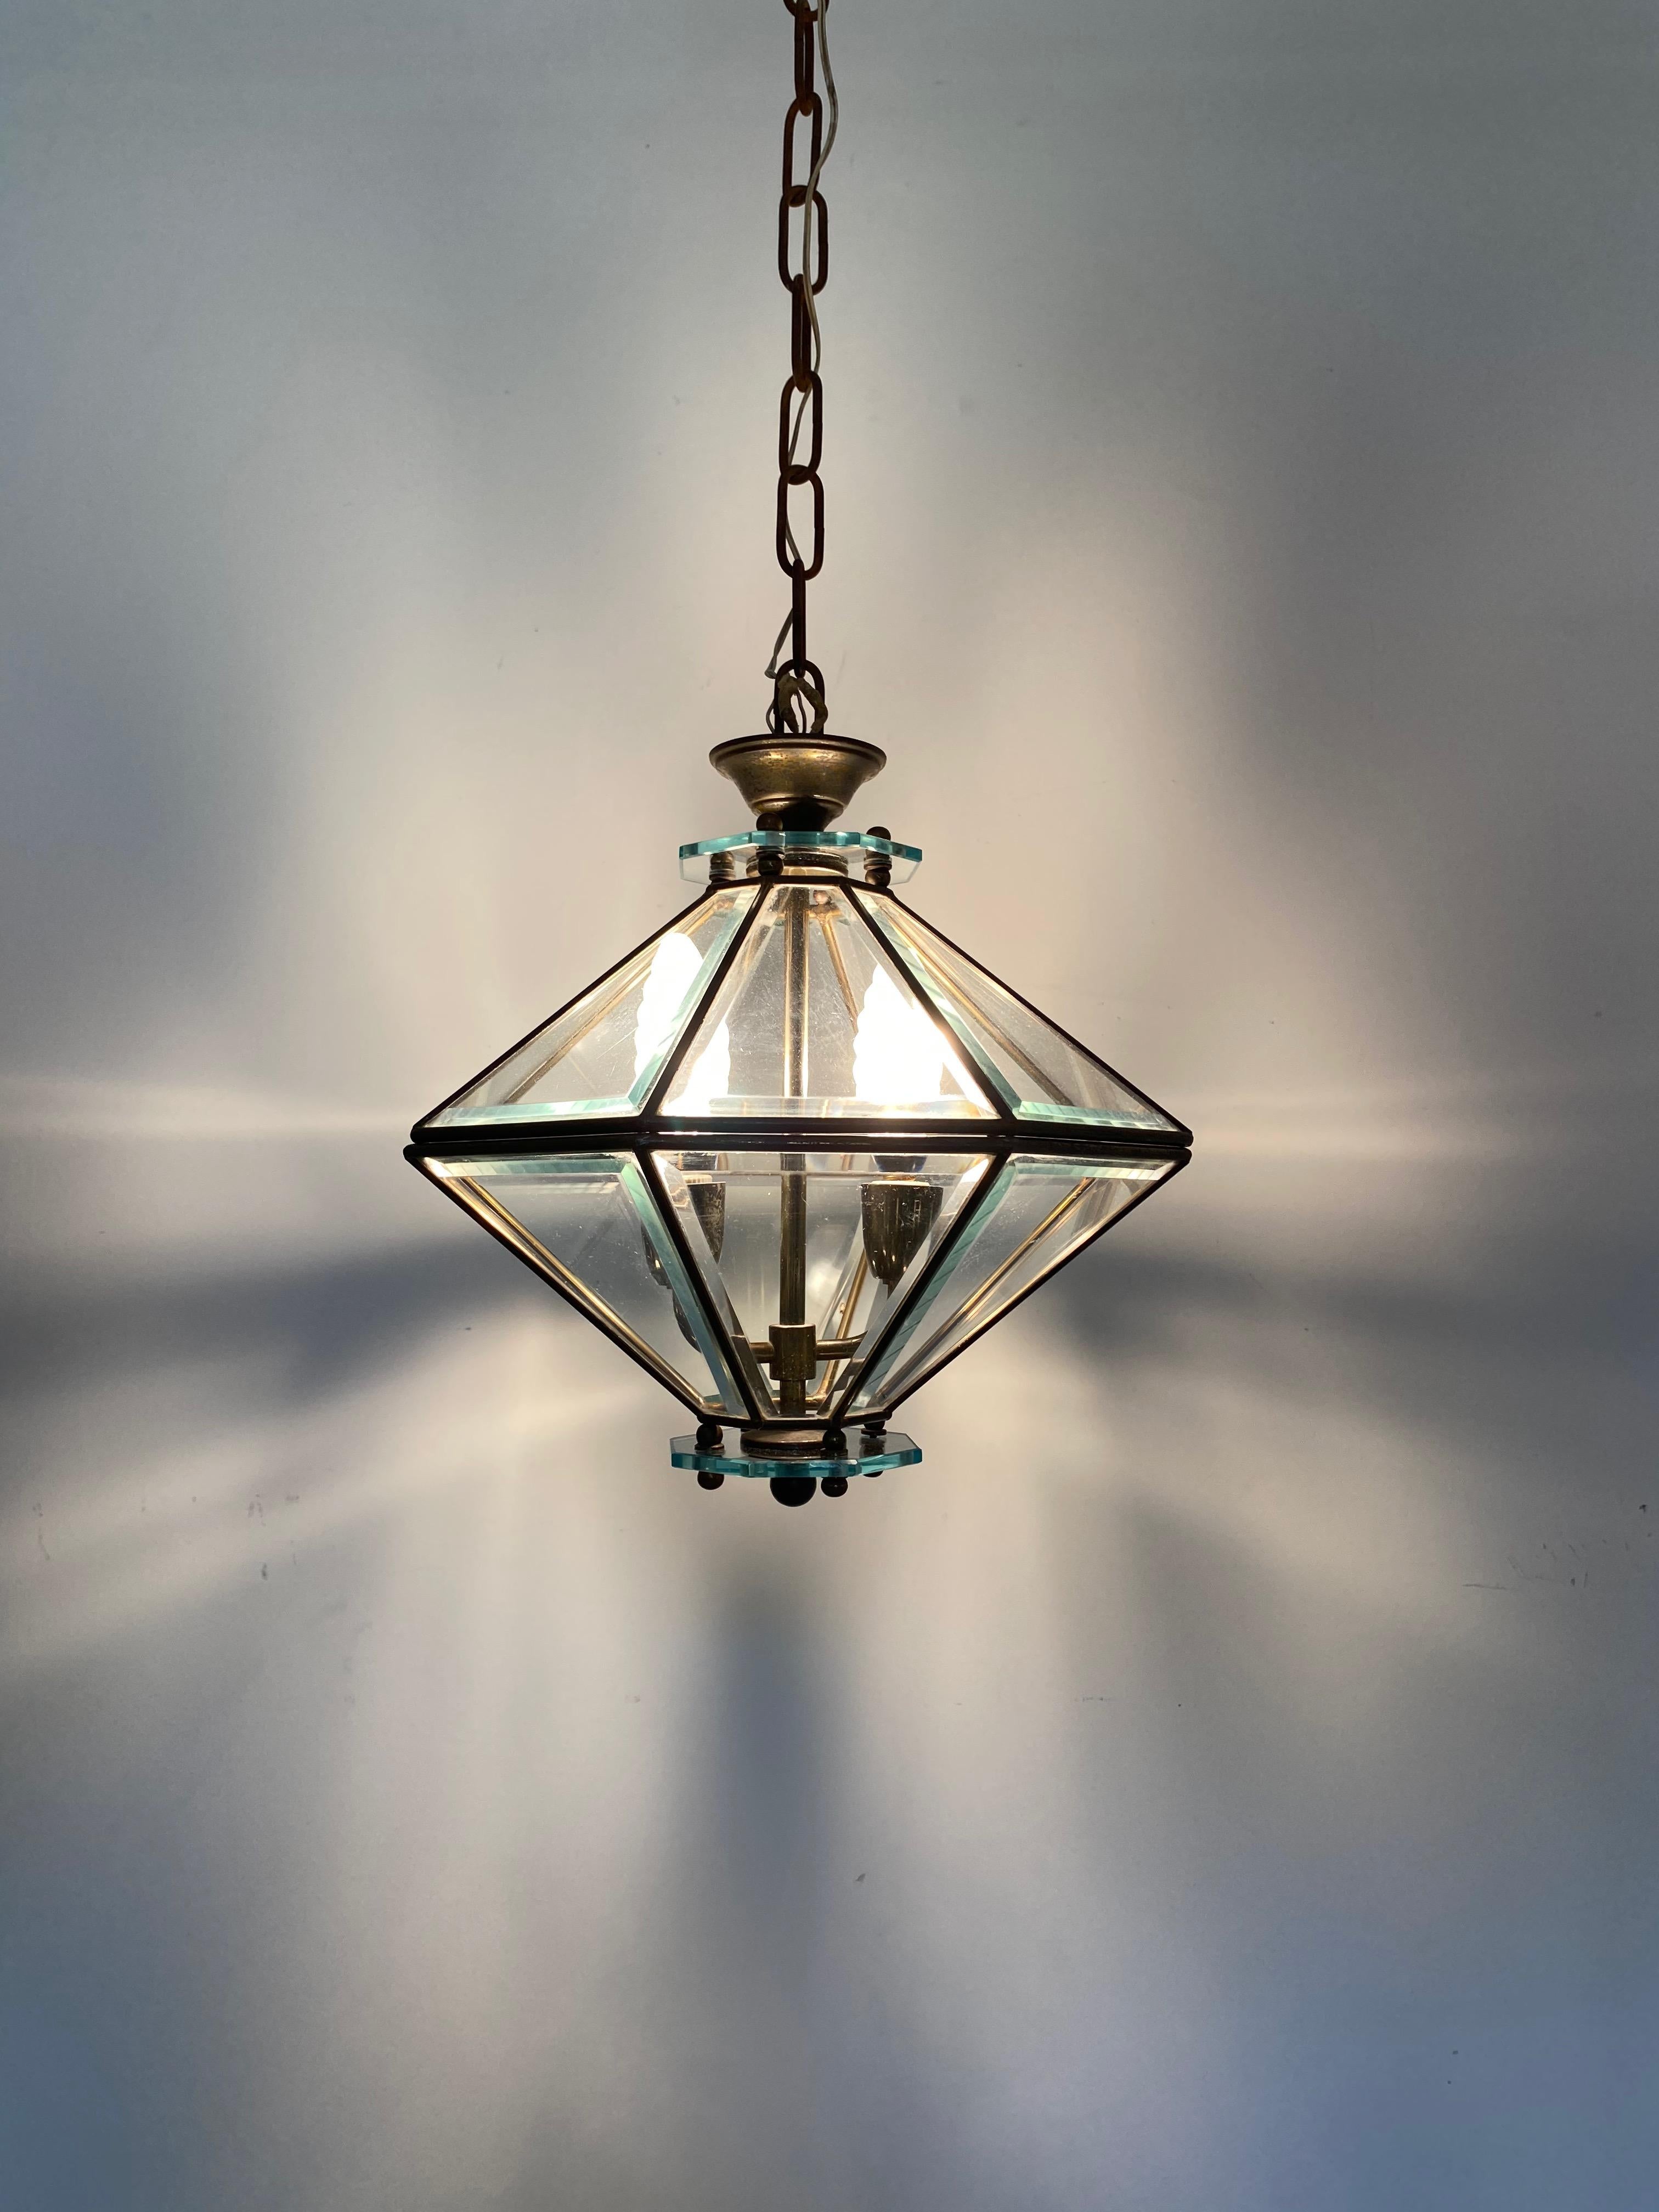 Octagonal Diamond Chandelier Lantern Brass and Glass Fontana Arte, Italy, 1950s In Good Condition For Sale In Rome, IT